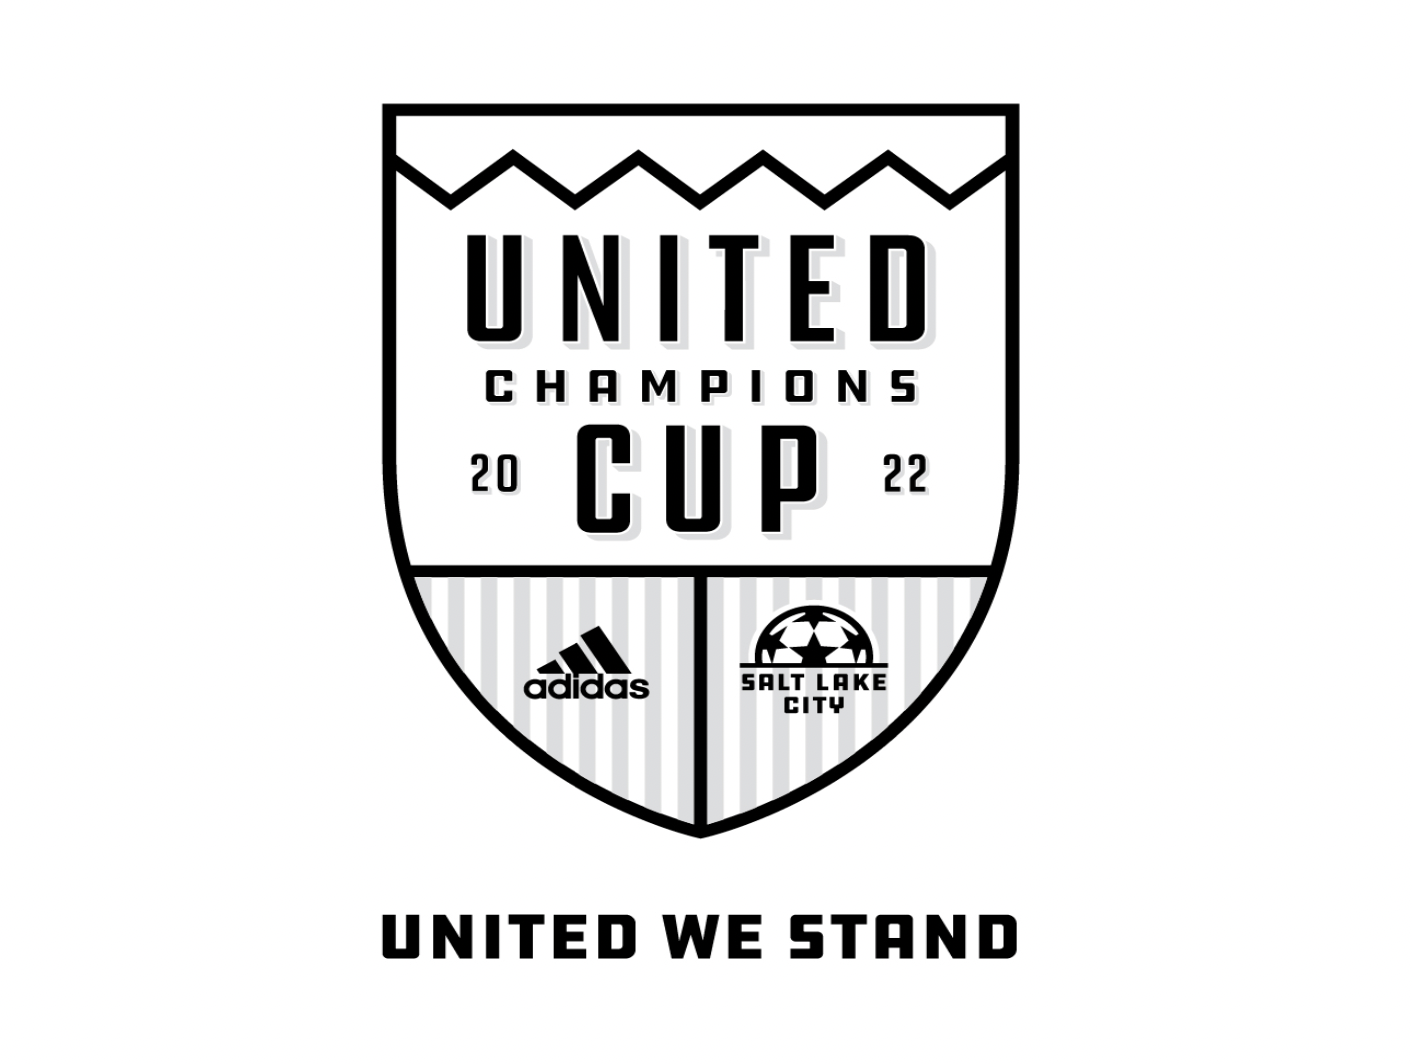 United Champions Cup